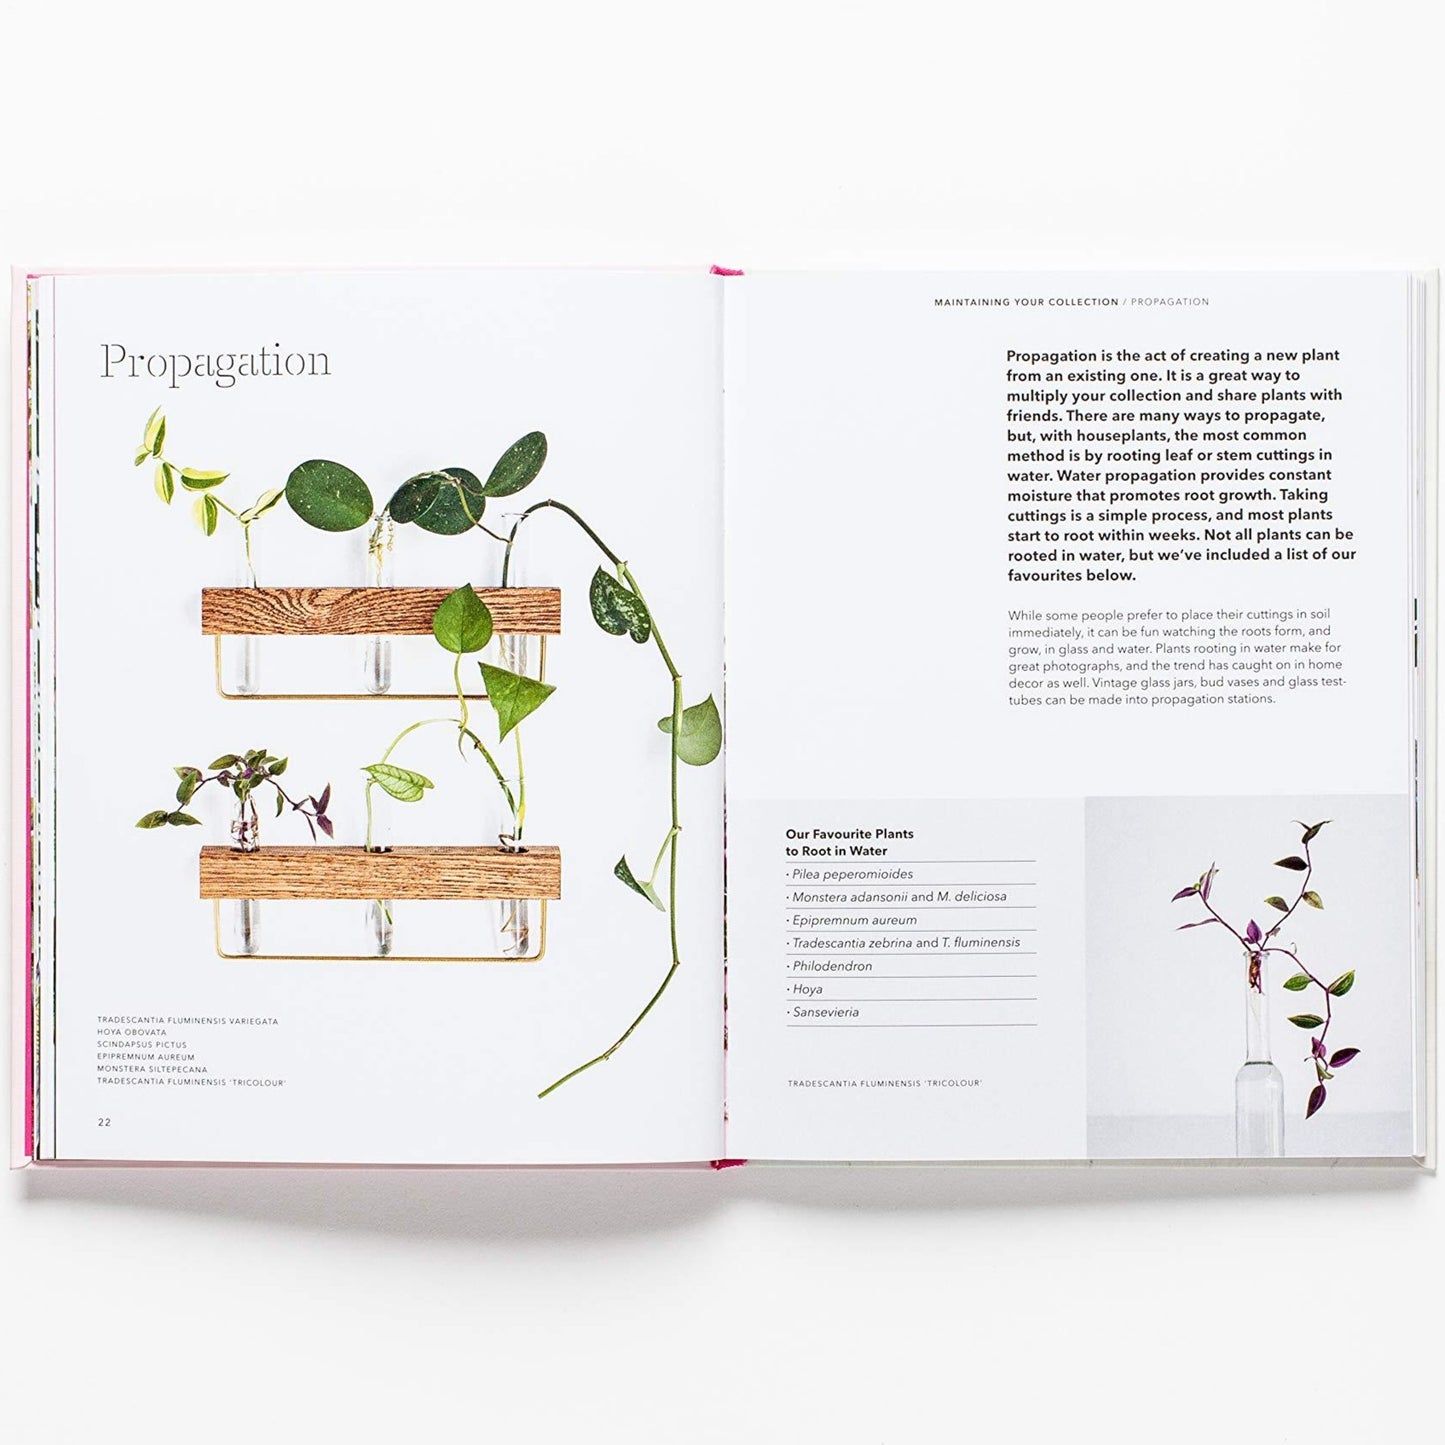 Propagation is the act of creating a new plant from an existing one.